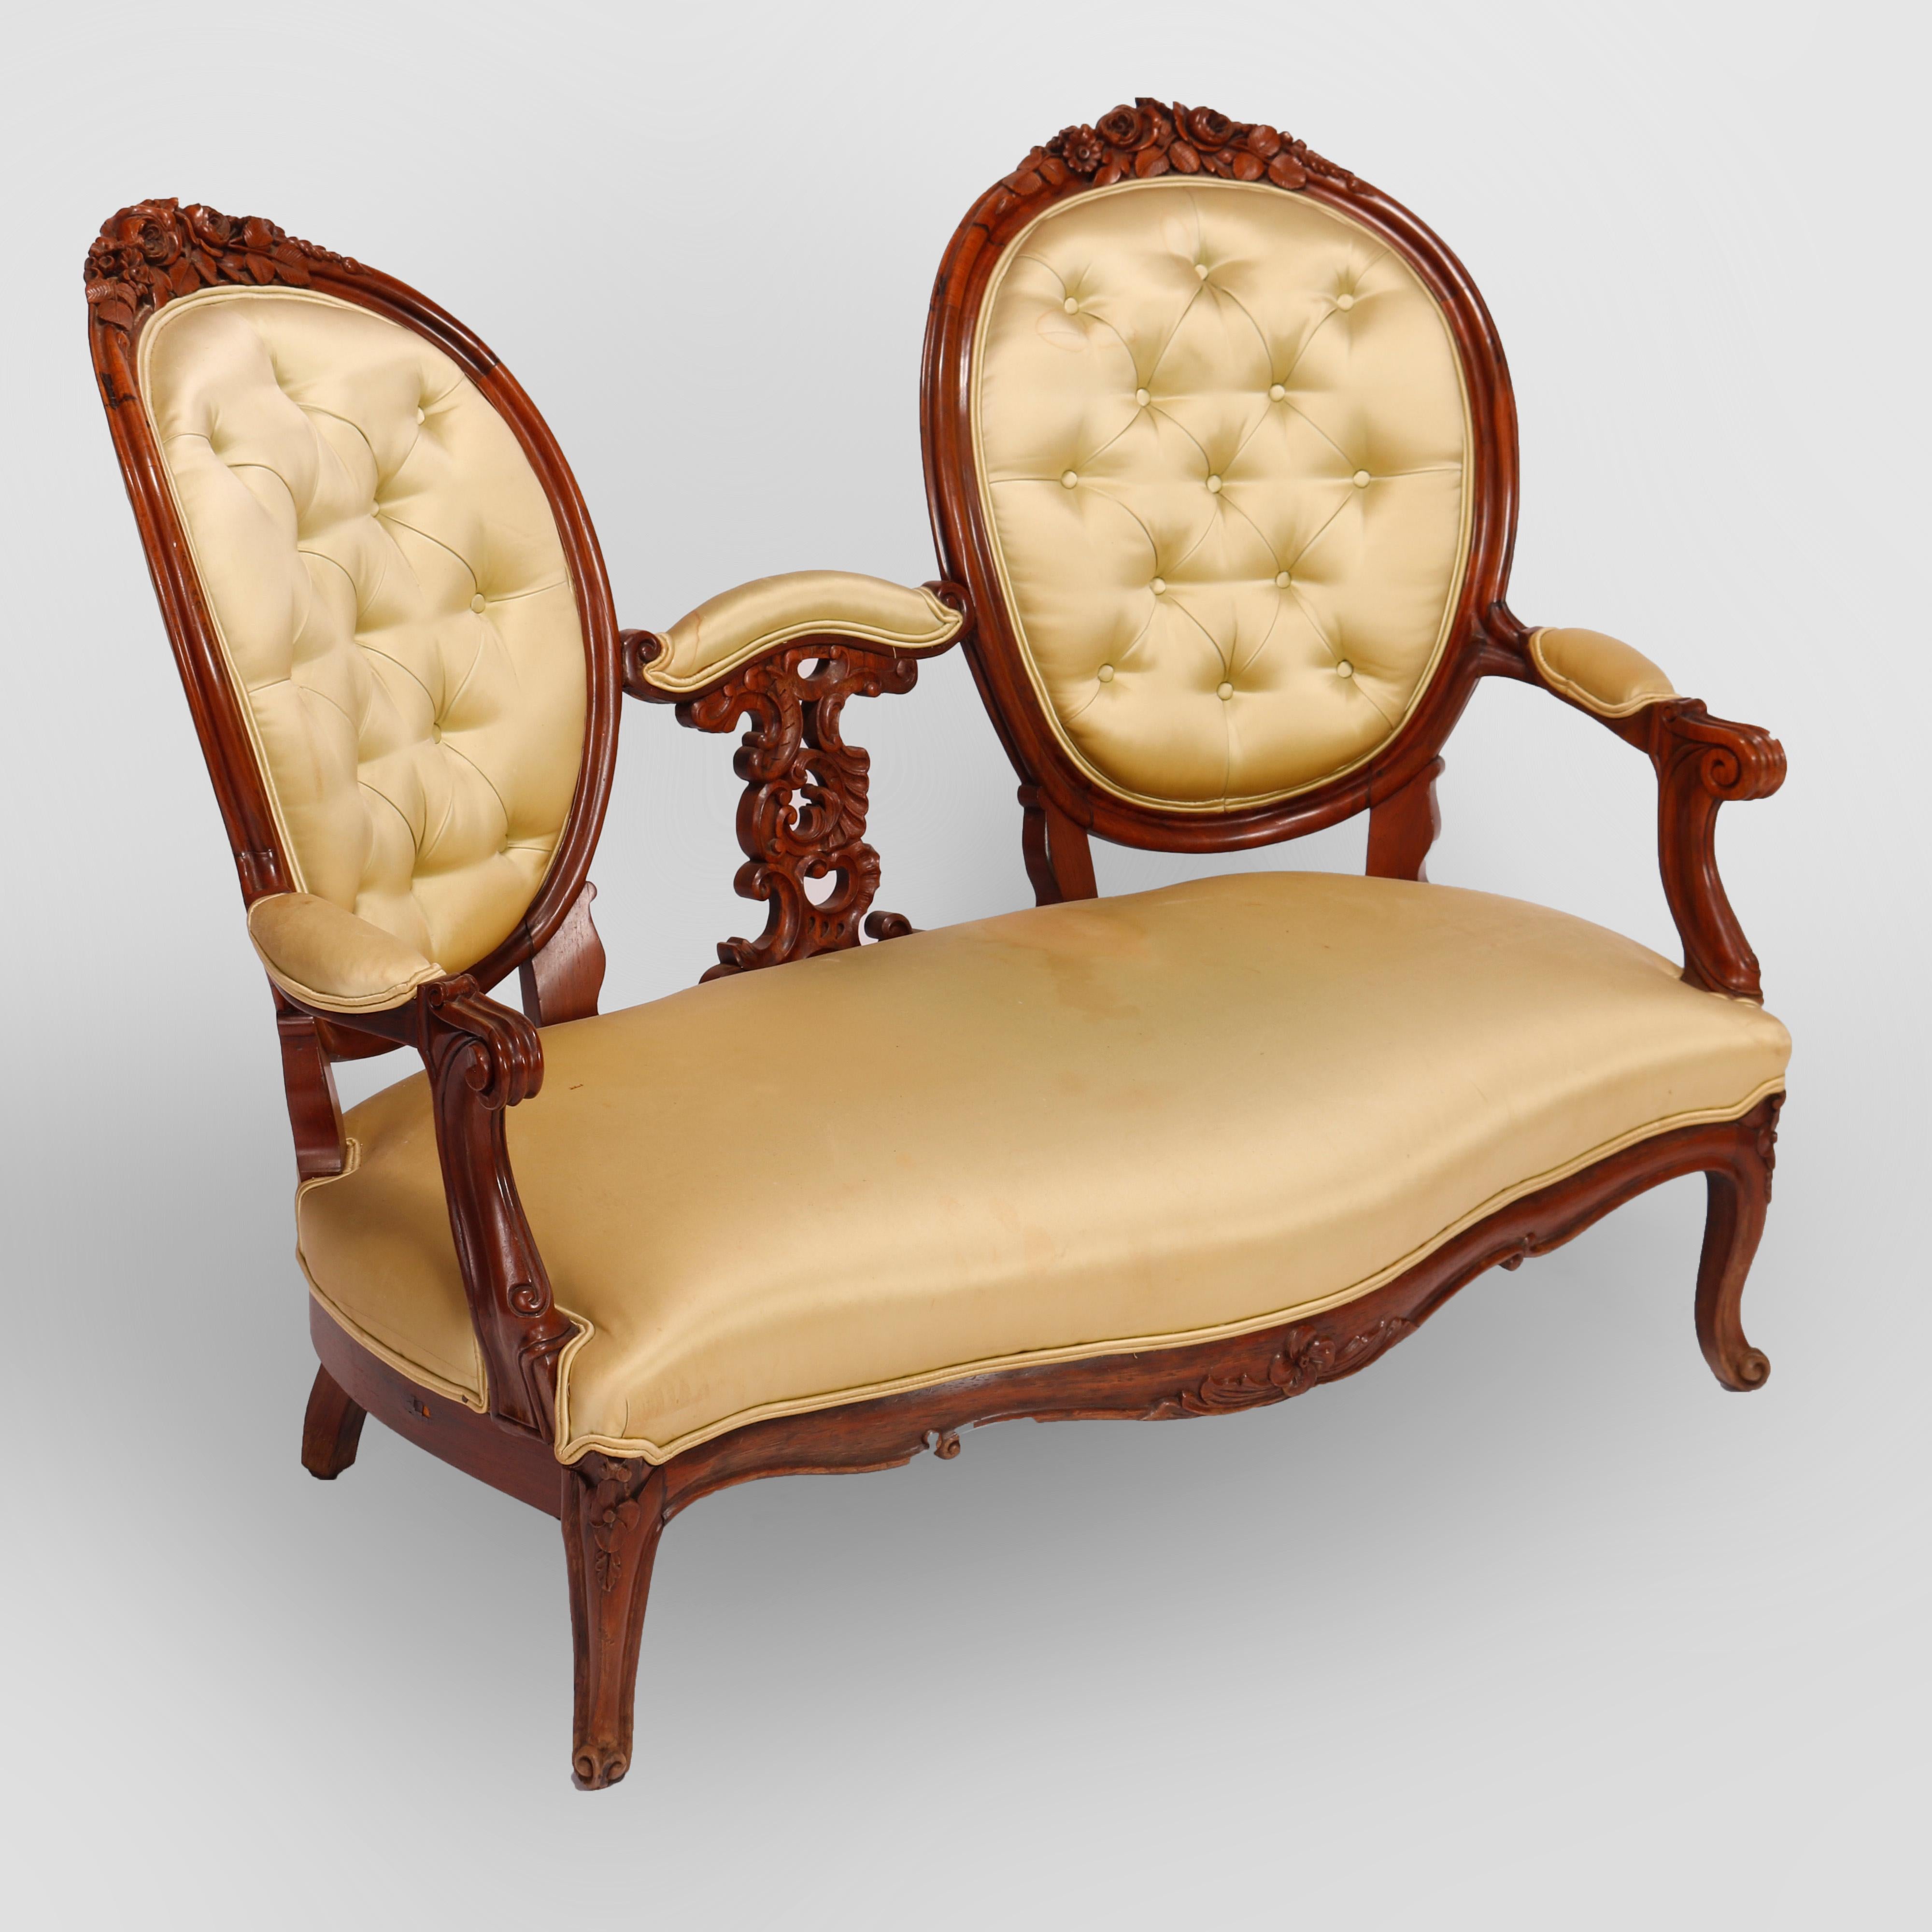 An antique Renaissance Revival settee offers rosewood construction with back having flanking tufted oval medallions with carved floral crests and carved gadroon element between, shaped serpentine seat, and raised on cabriole legs, c1880

Measures -